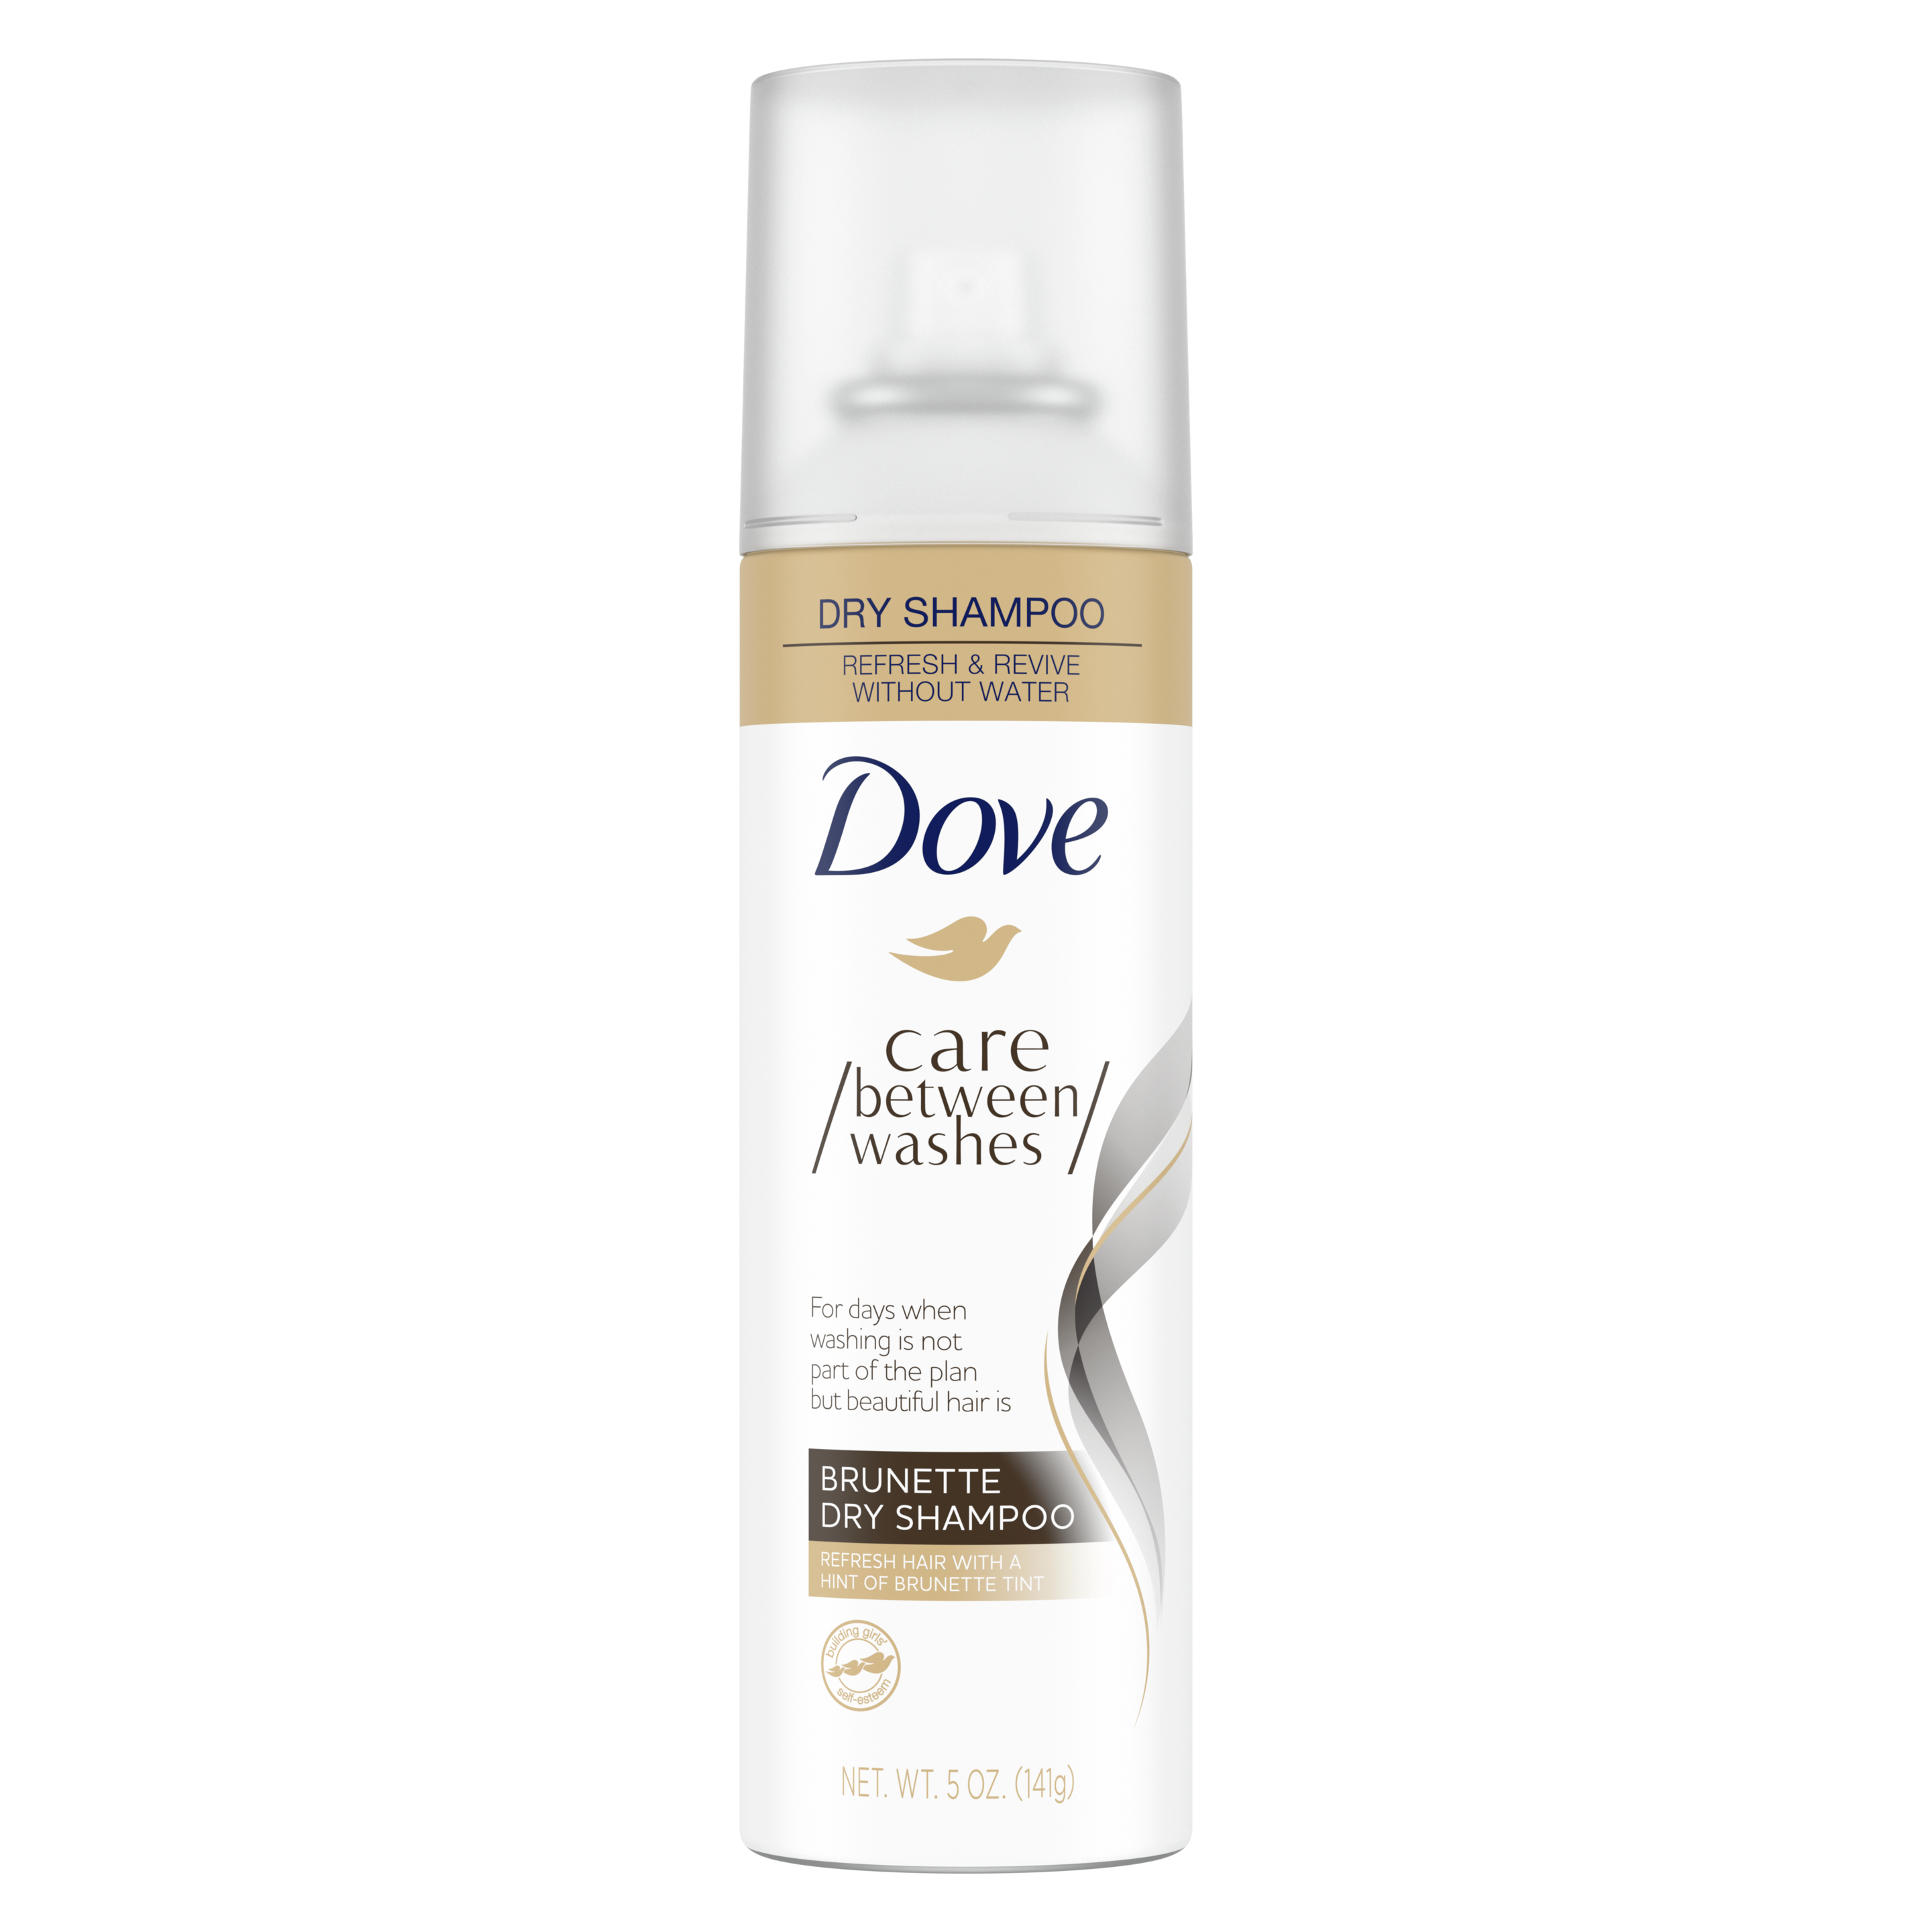 Dove Care Between Washes Brunette Dry Shampoo 5 oz